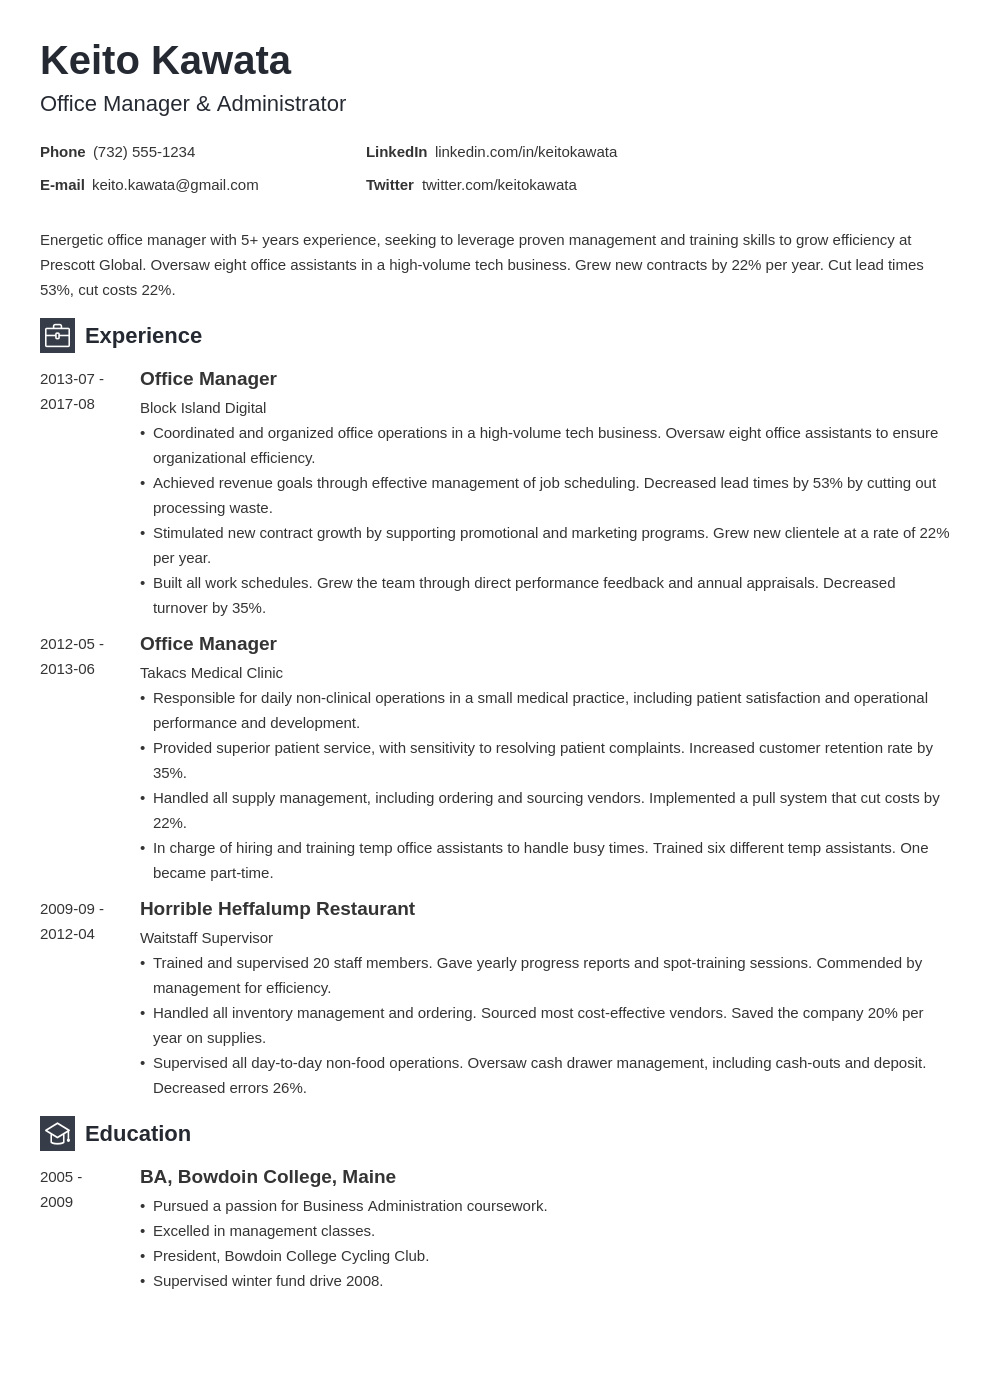 Office Manager Job Description for a Resume Examples